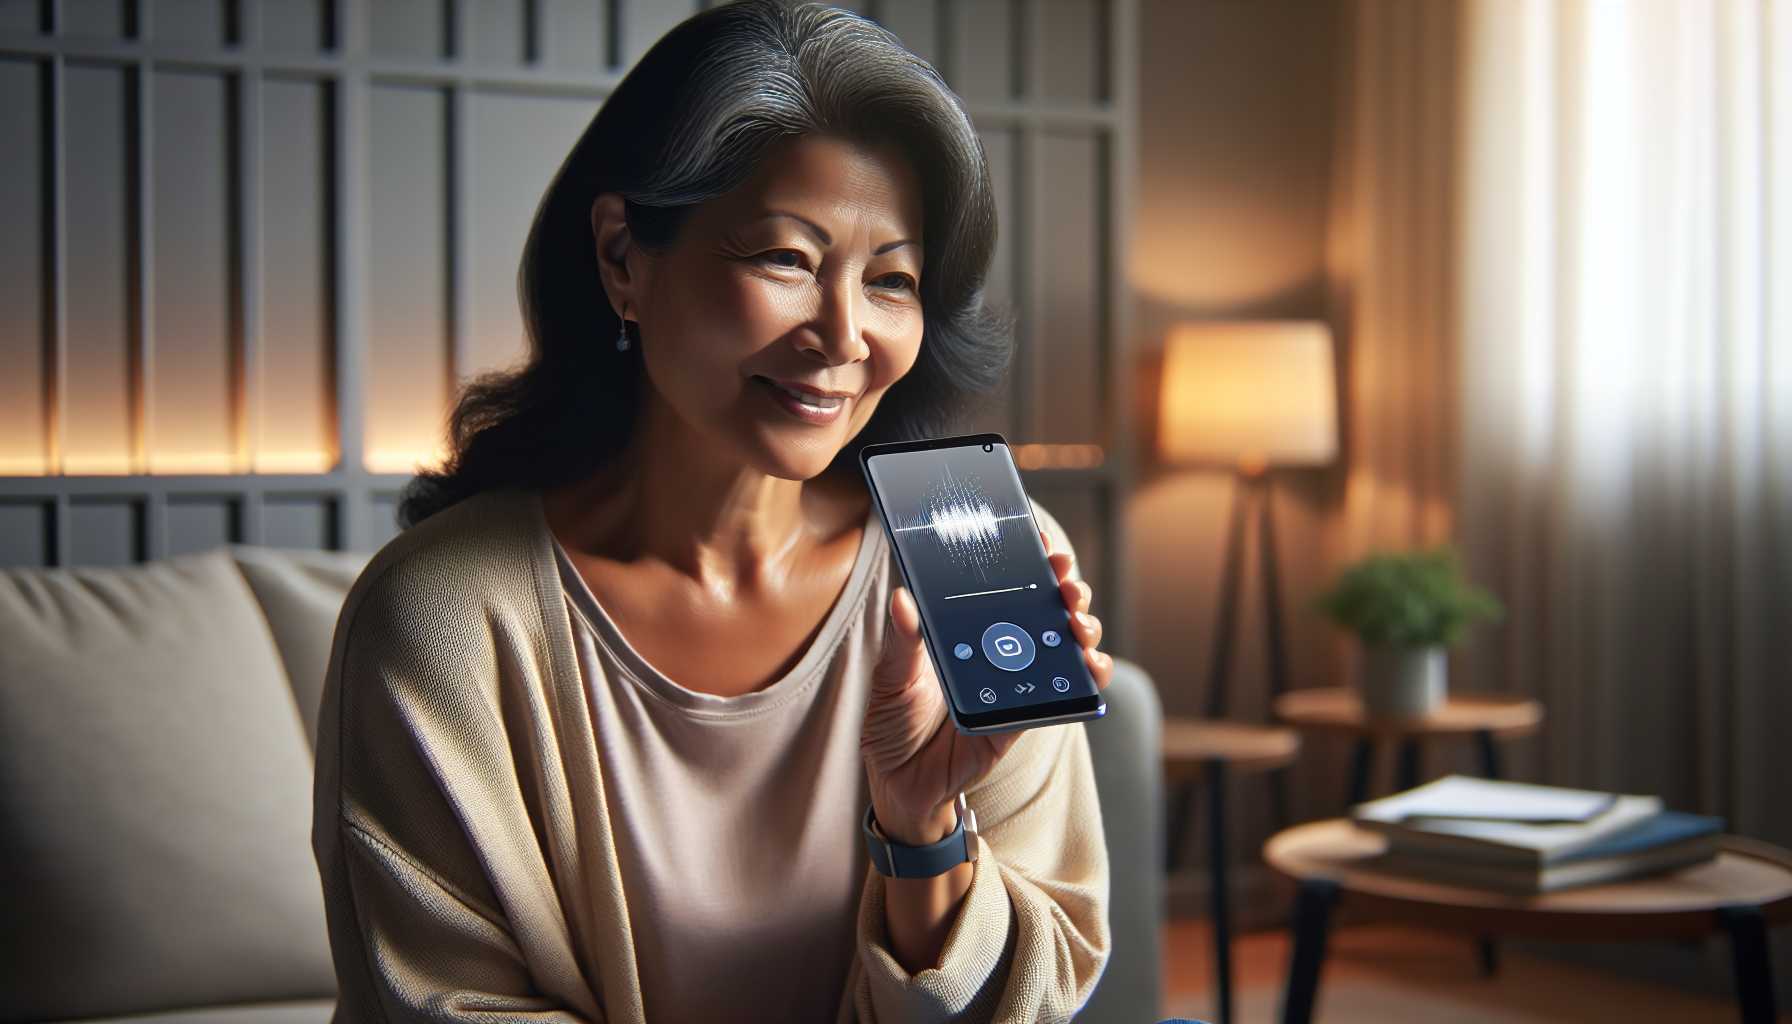 person speaking into a voice-recorder app on a smartphone